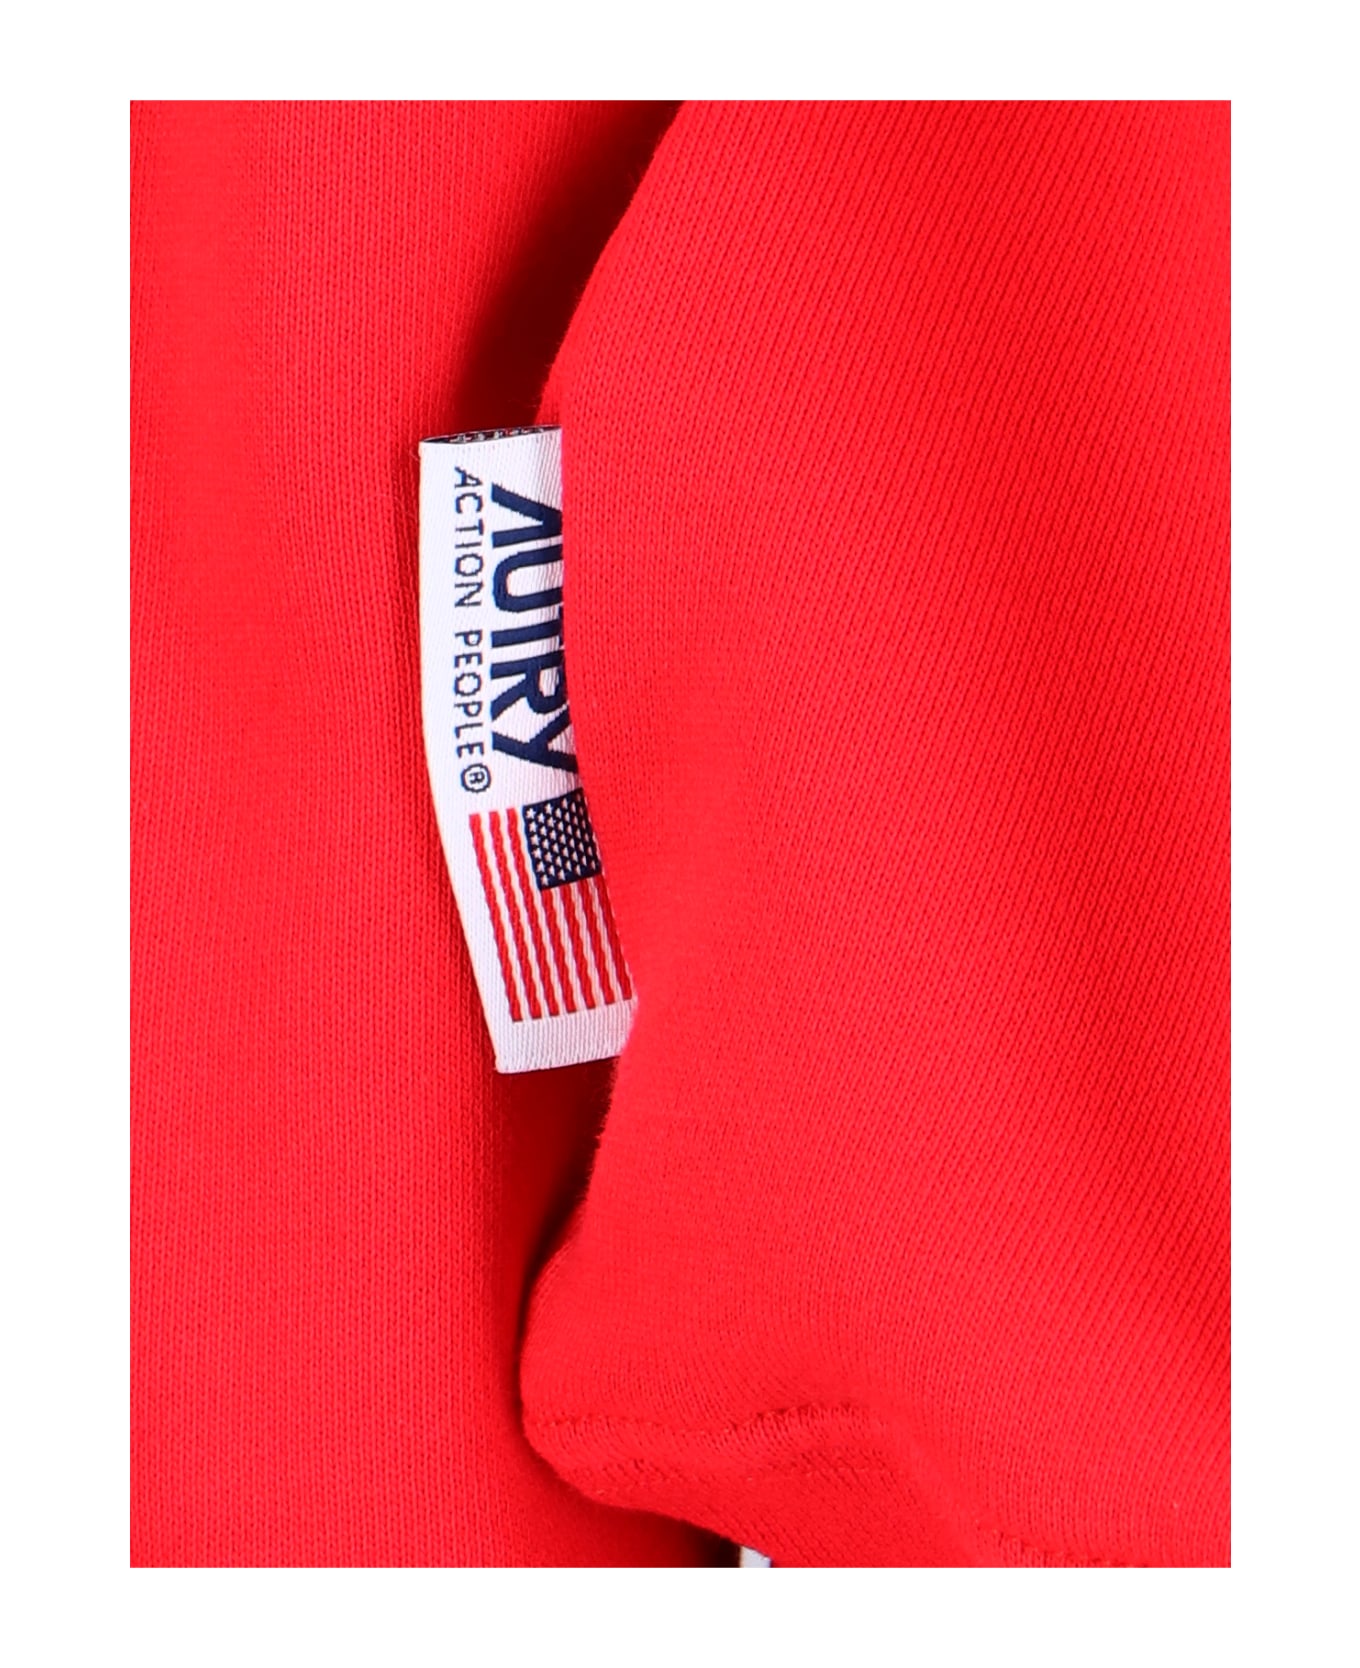 Autry Sweater - Red